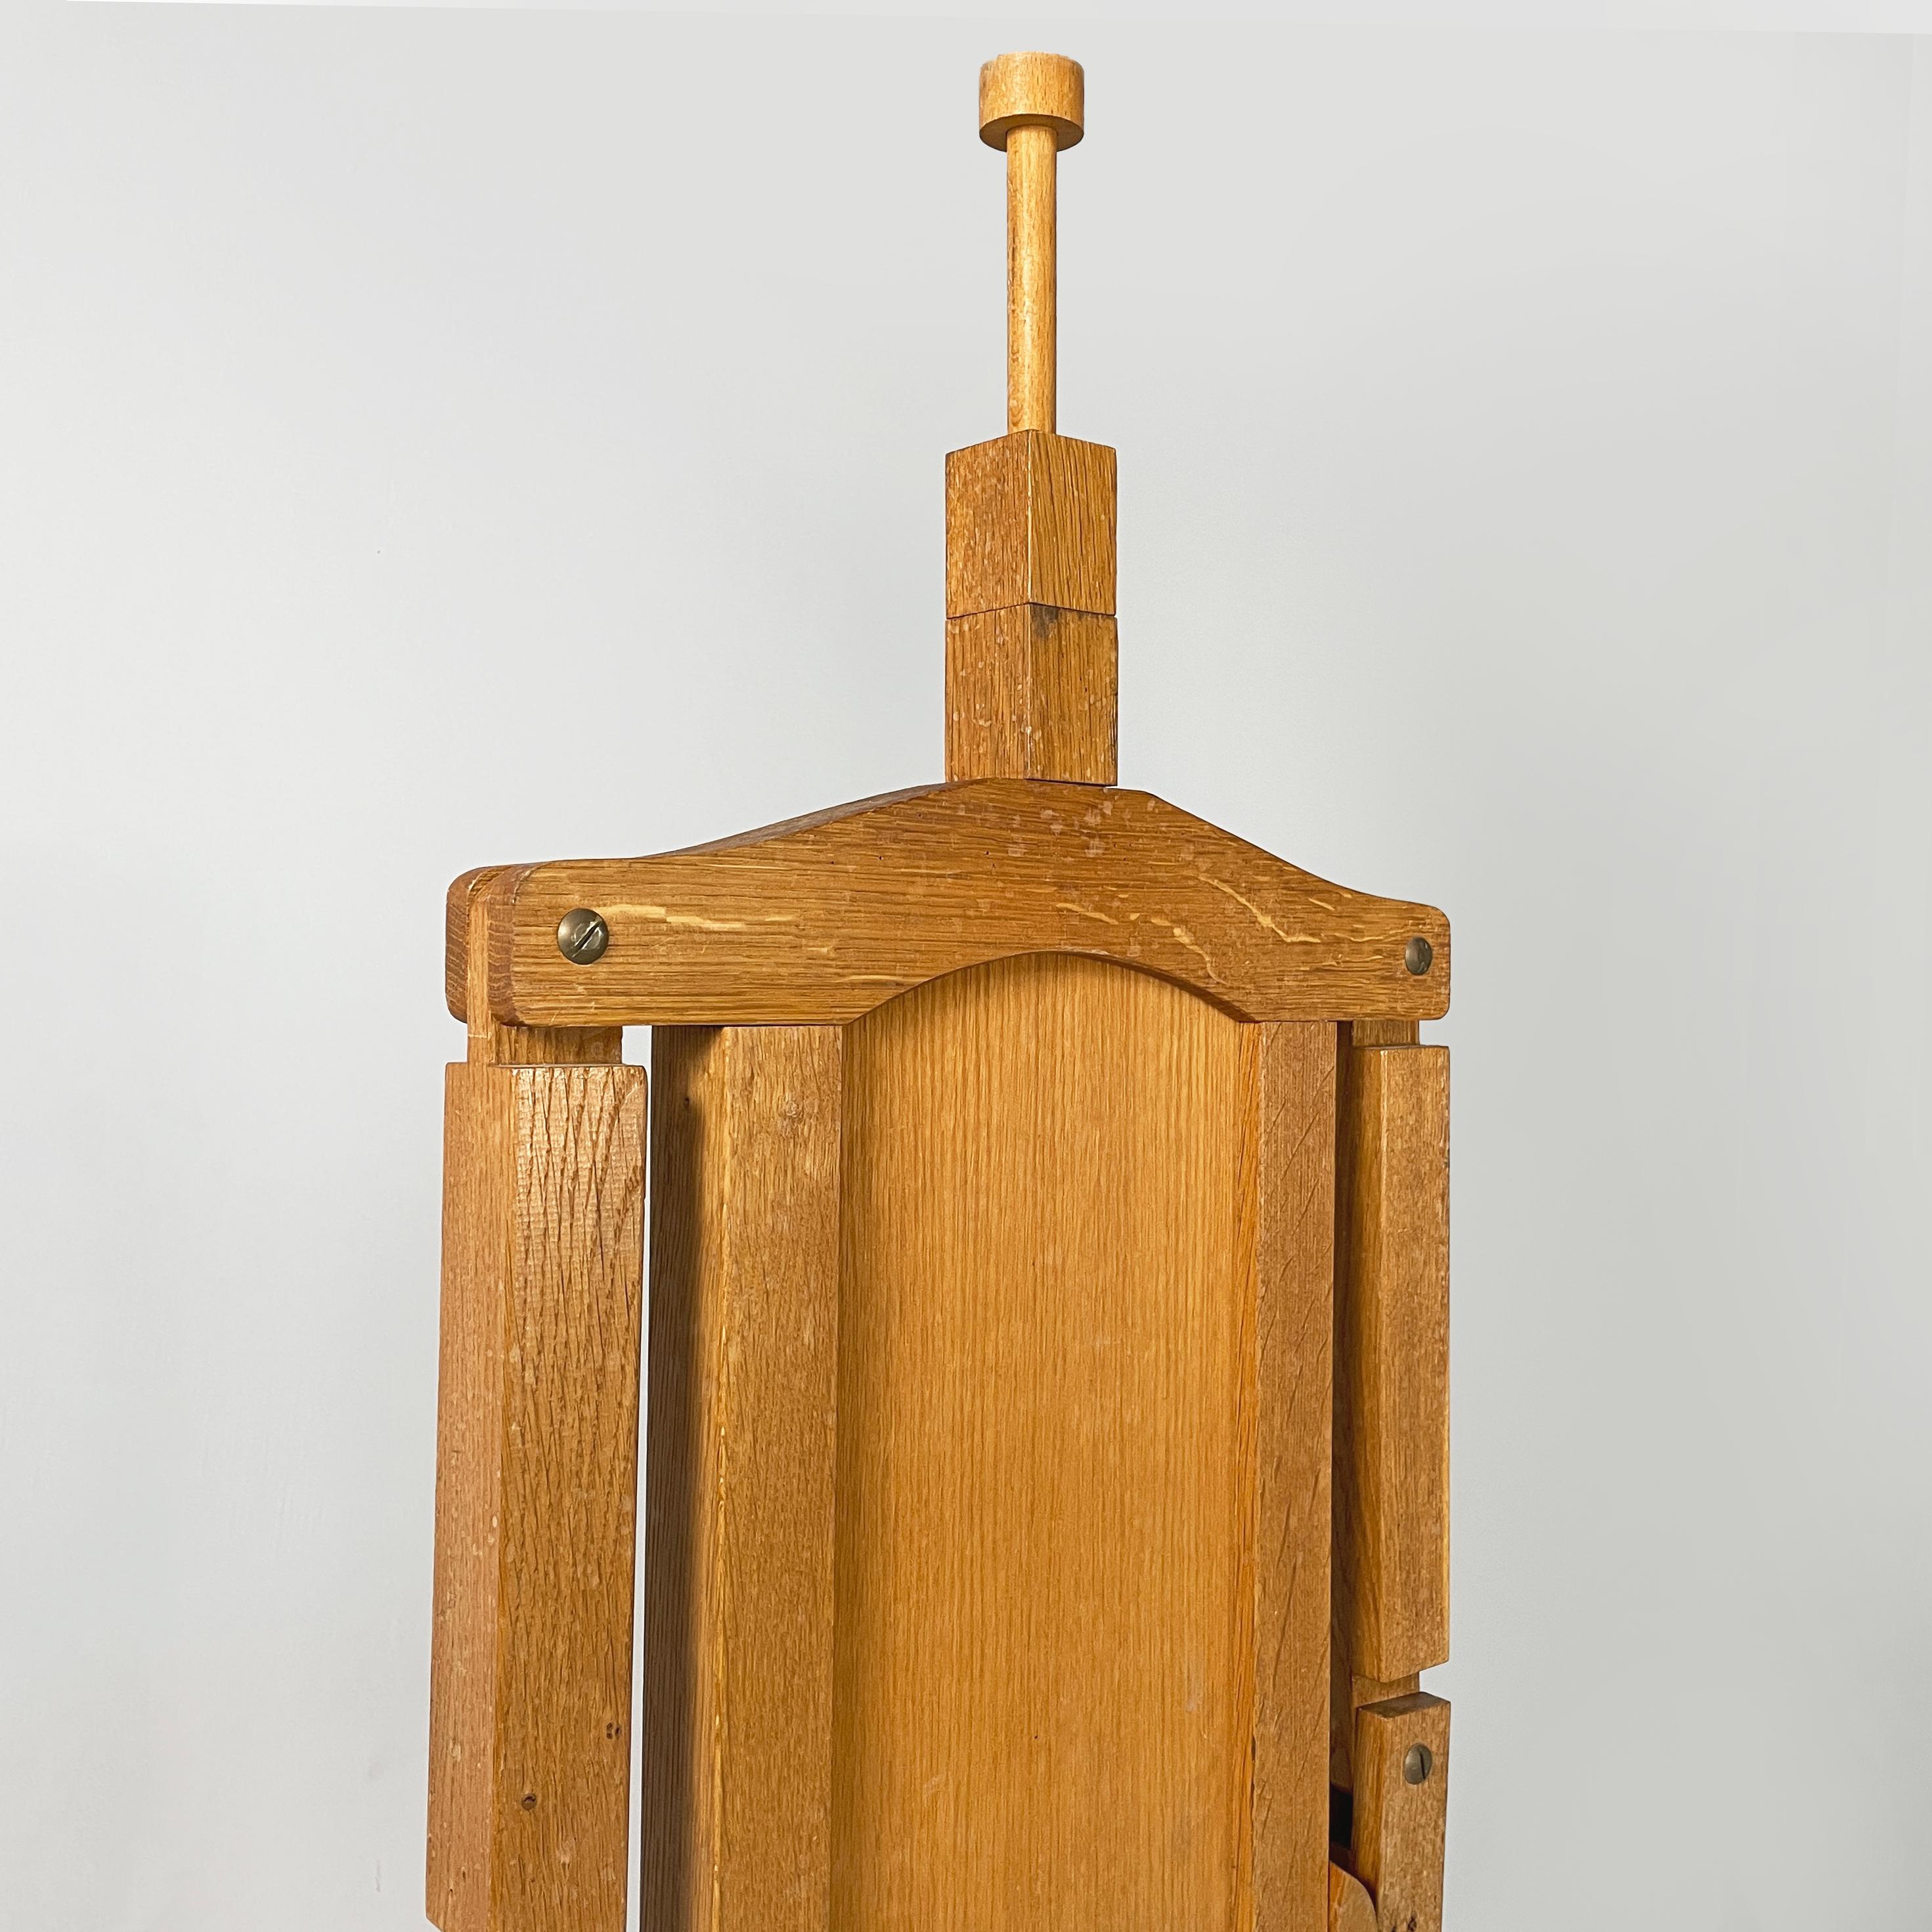 Italian modern Wood valet stand with hat holder by BeroDesign Cacharel, 1980s For Sale 2